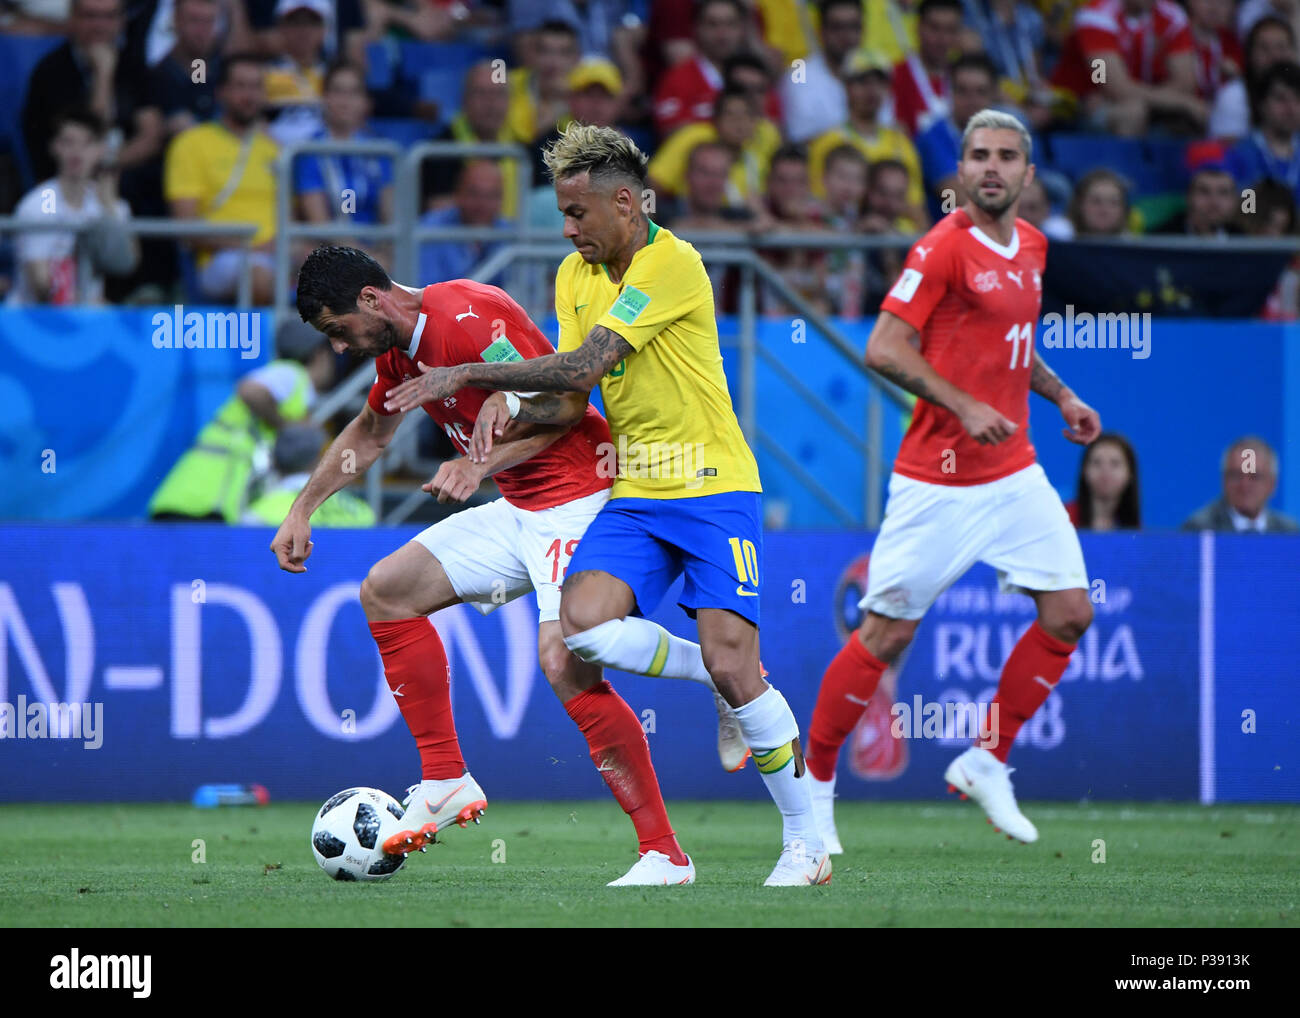 Rostov On Don. 17th June, 2018. Blerim Dzemaili (L) of Switzerland vies  with Neymar (C) of Brazil during a group E match between Brazil and  Switzerland at the 2018 FIFA World Cup